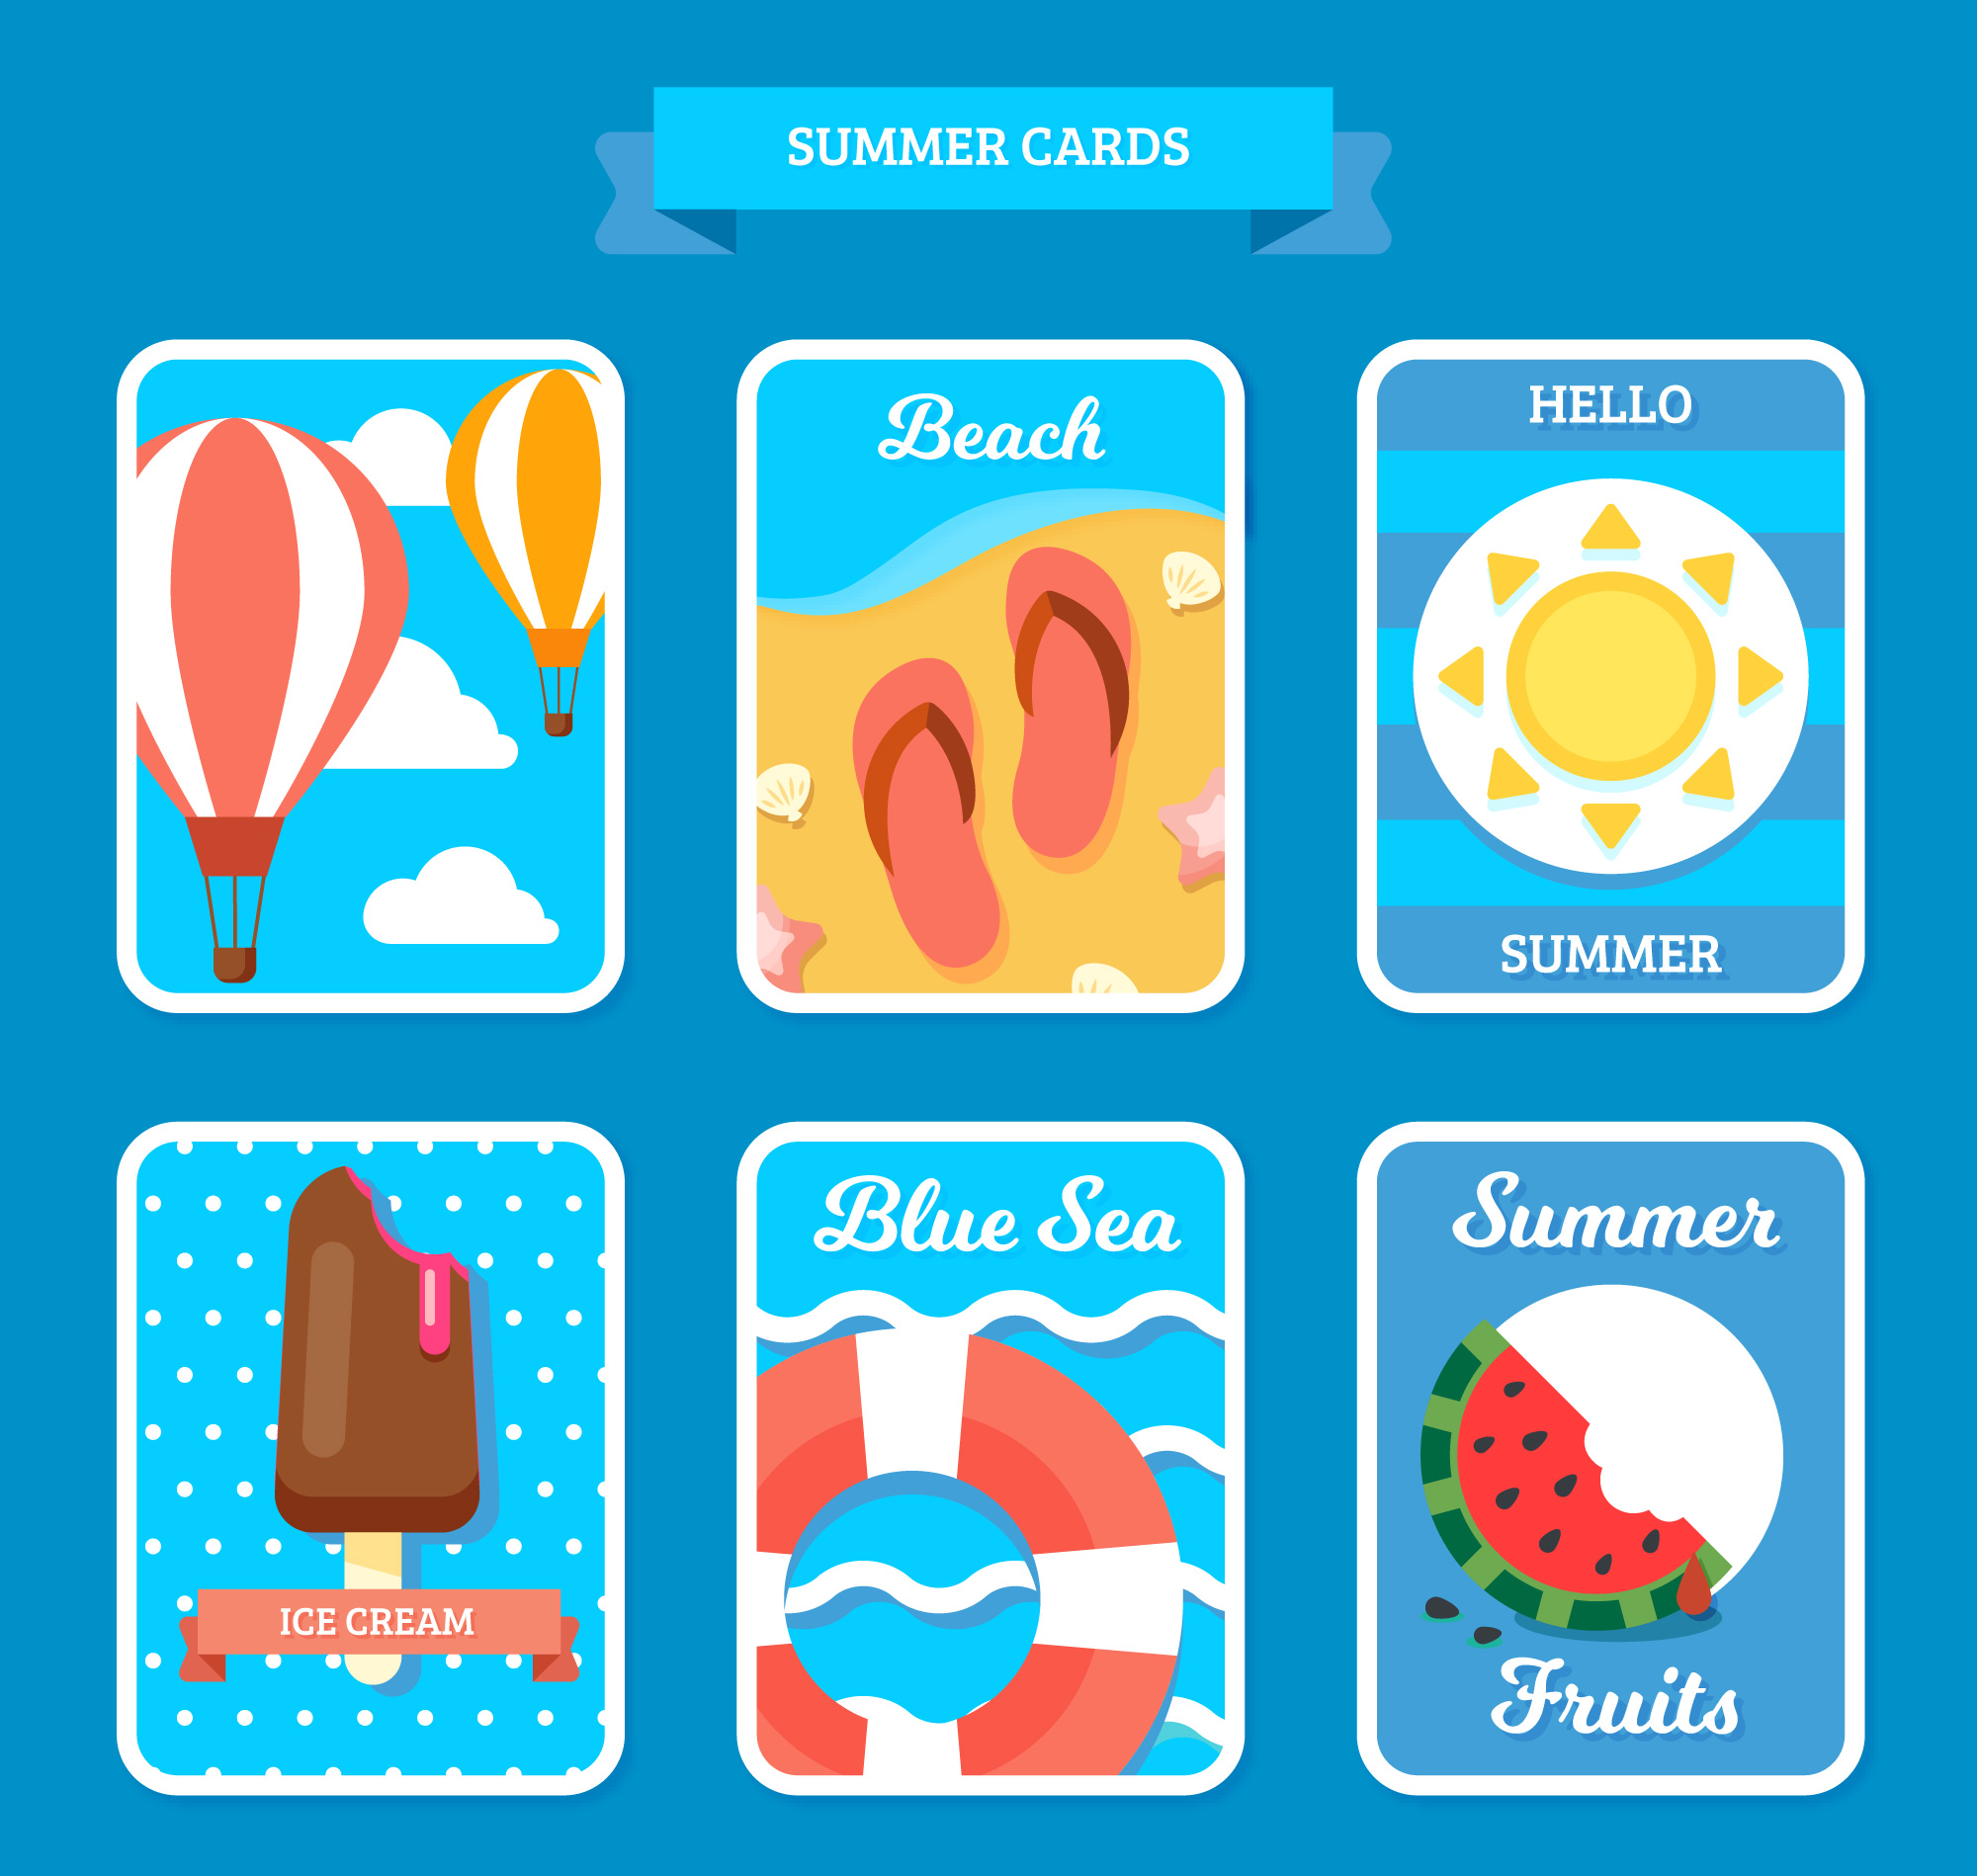 Comprehensive List of Summer Words and Things Related to Summer from A to Z